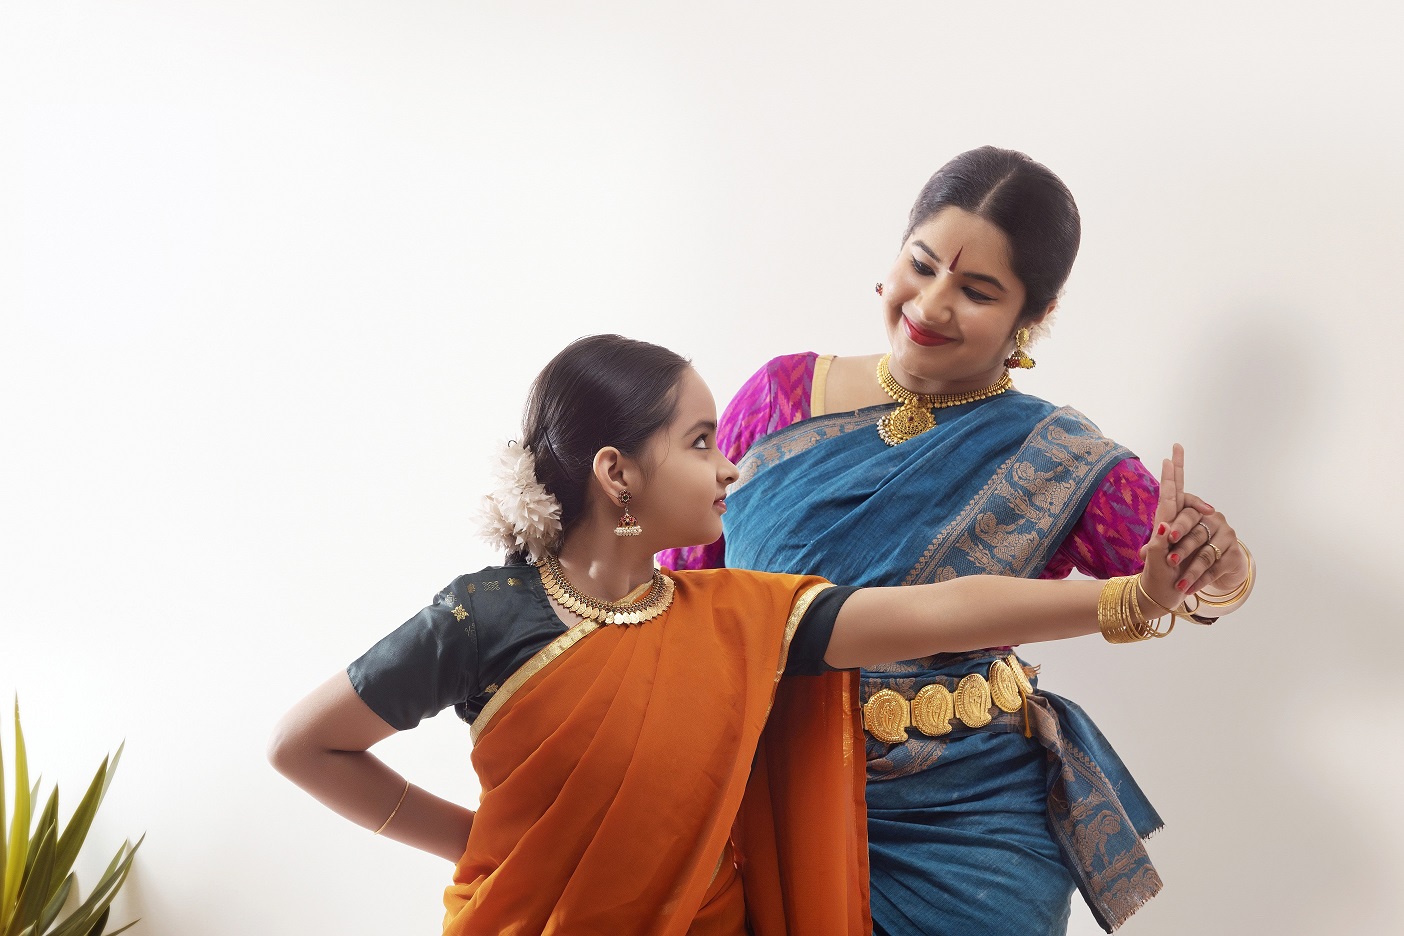 mother-daughter-why-upgrade-india-1404 x 936.jpg